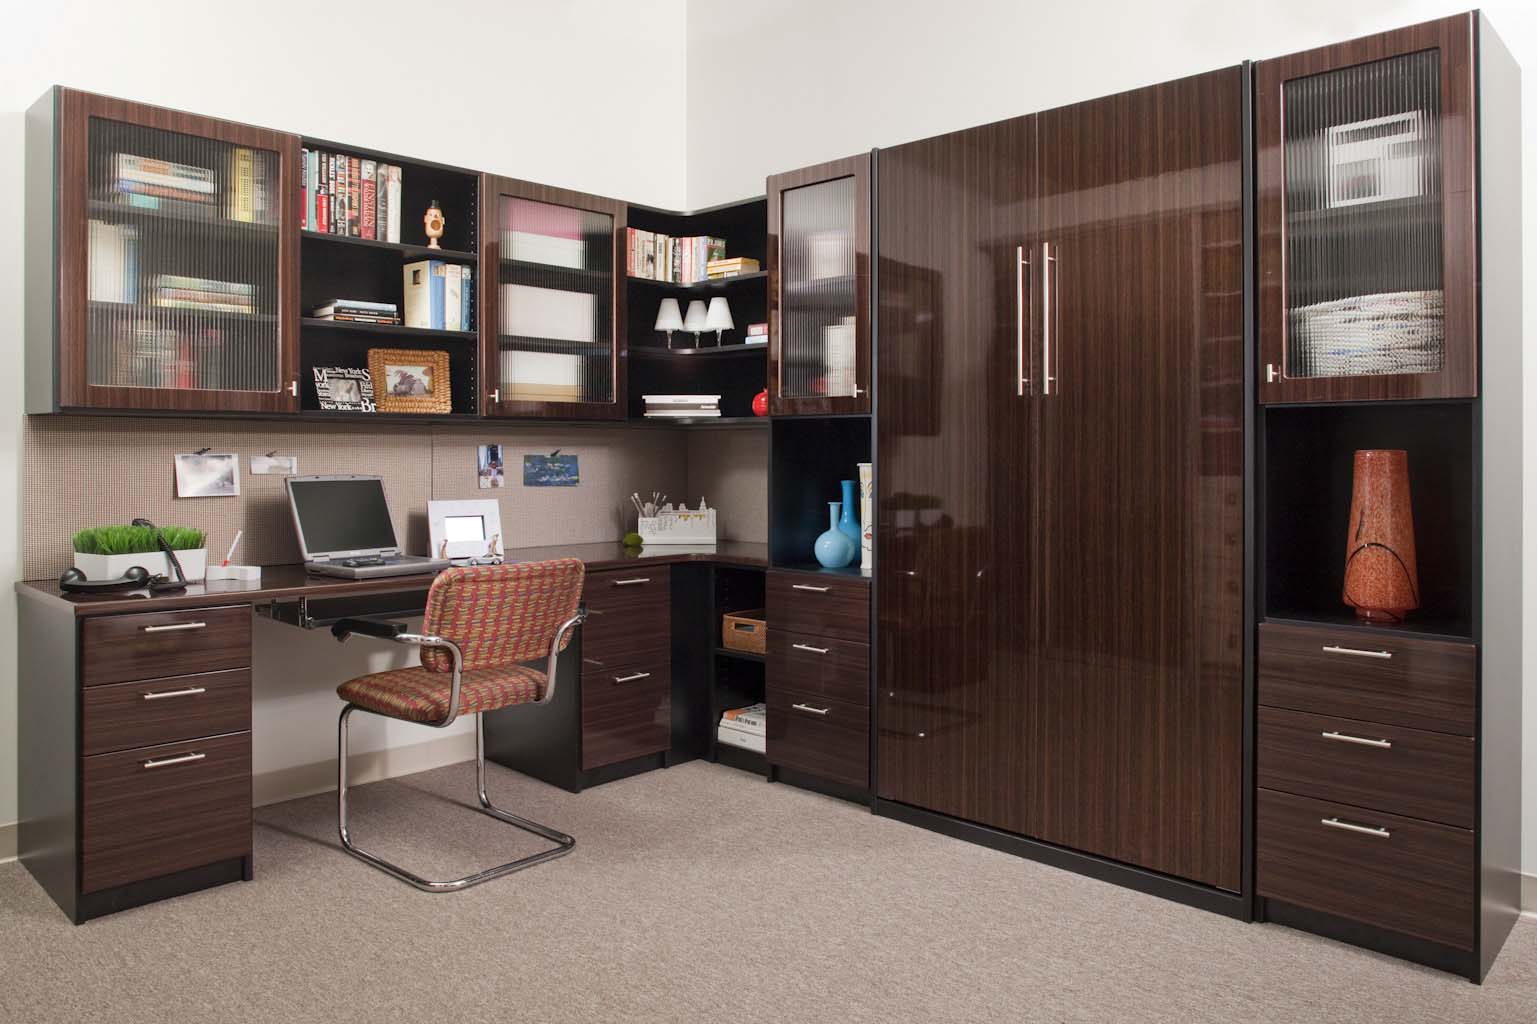 Custom built Murphy Bed and office by closet company